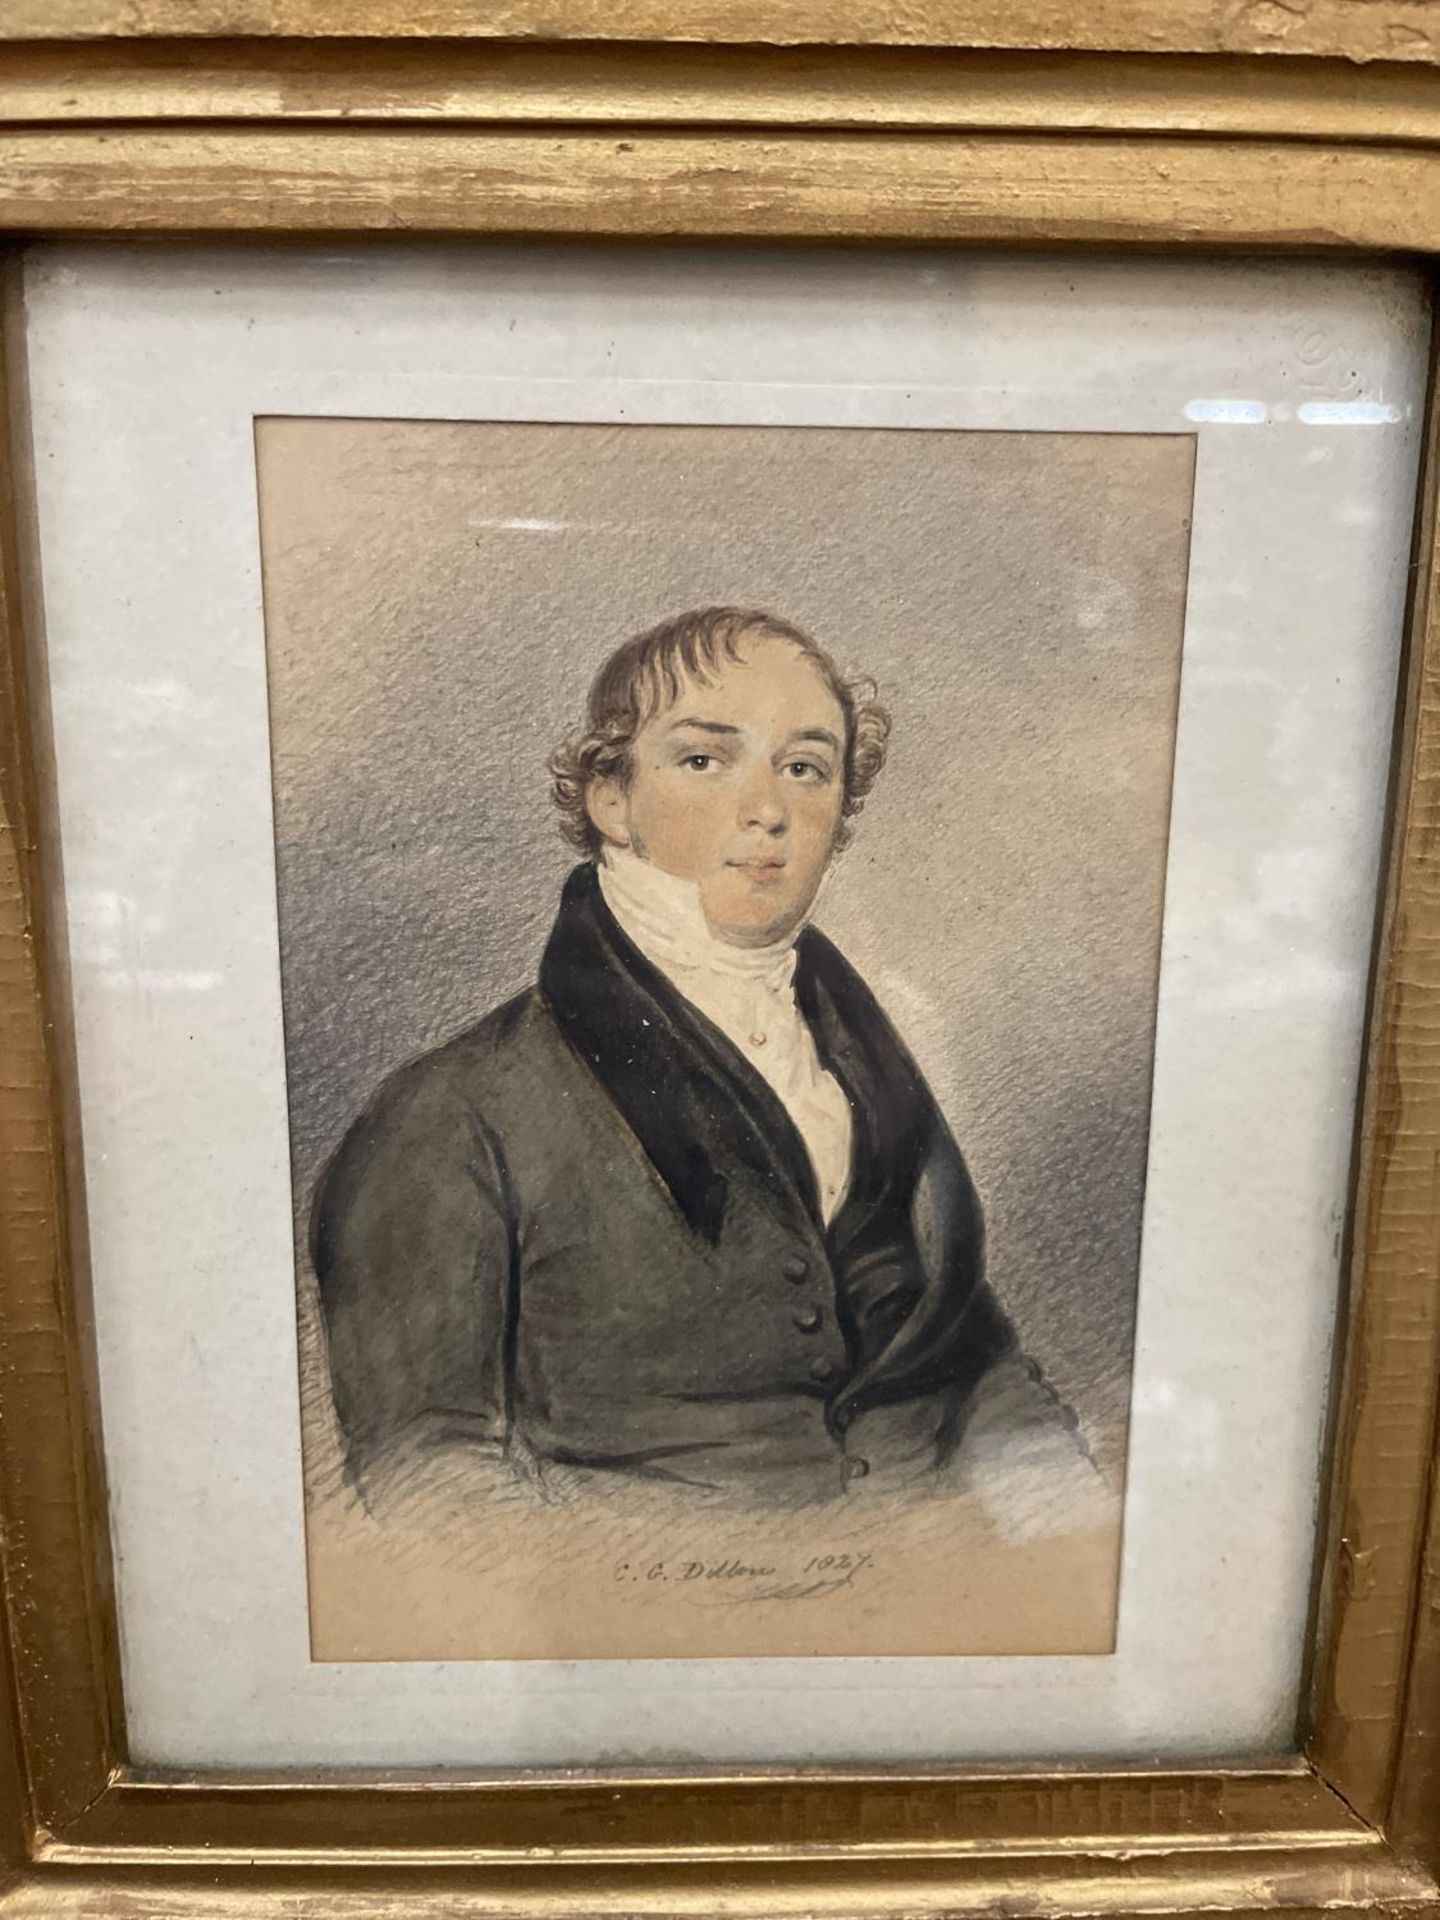 A GILT FRAMED PRINT OF A YOUNG GENTLEMAN IN WATERCOLOUR BY C.G.DILLON 1827, 7.5" X 6" - Image 2 of 3